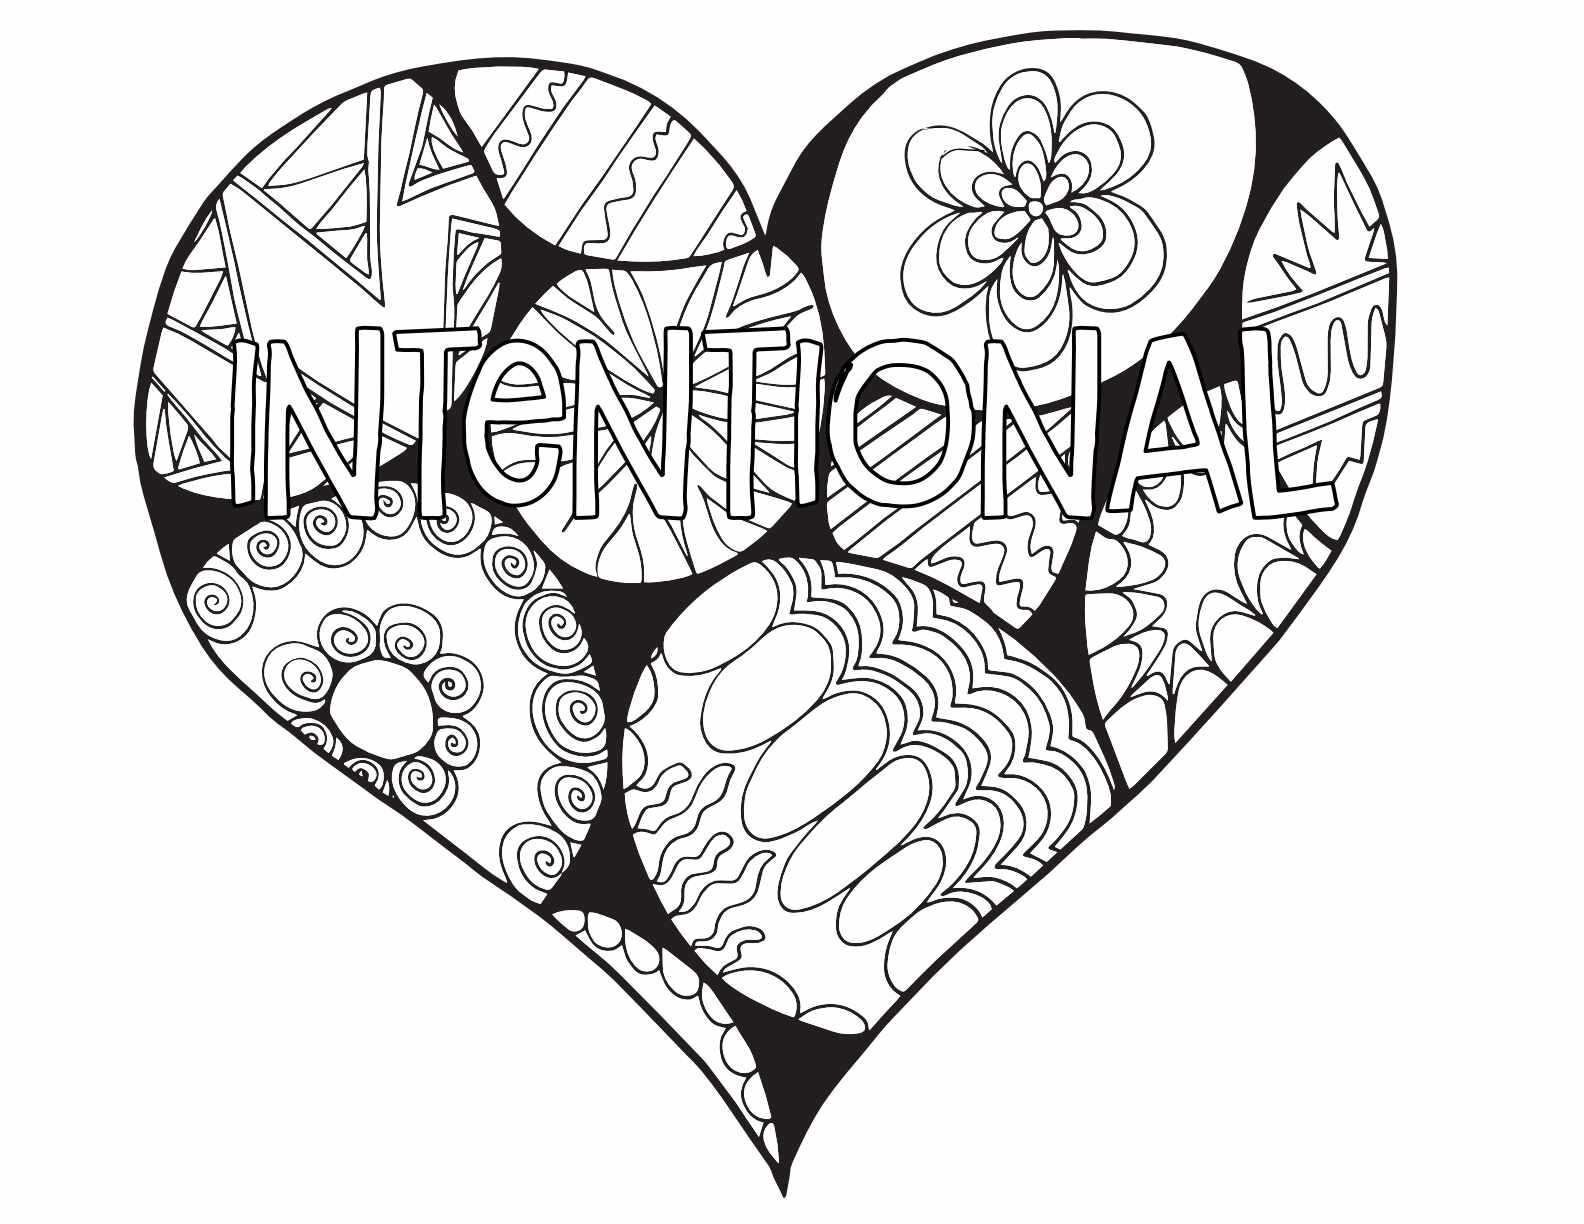 3 FREE INTENTIONAL PRINTABLE COLORING PAGES CLICK HERE TO DOWNLOAD THE PAGE ABOVE